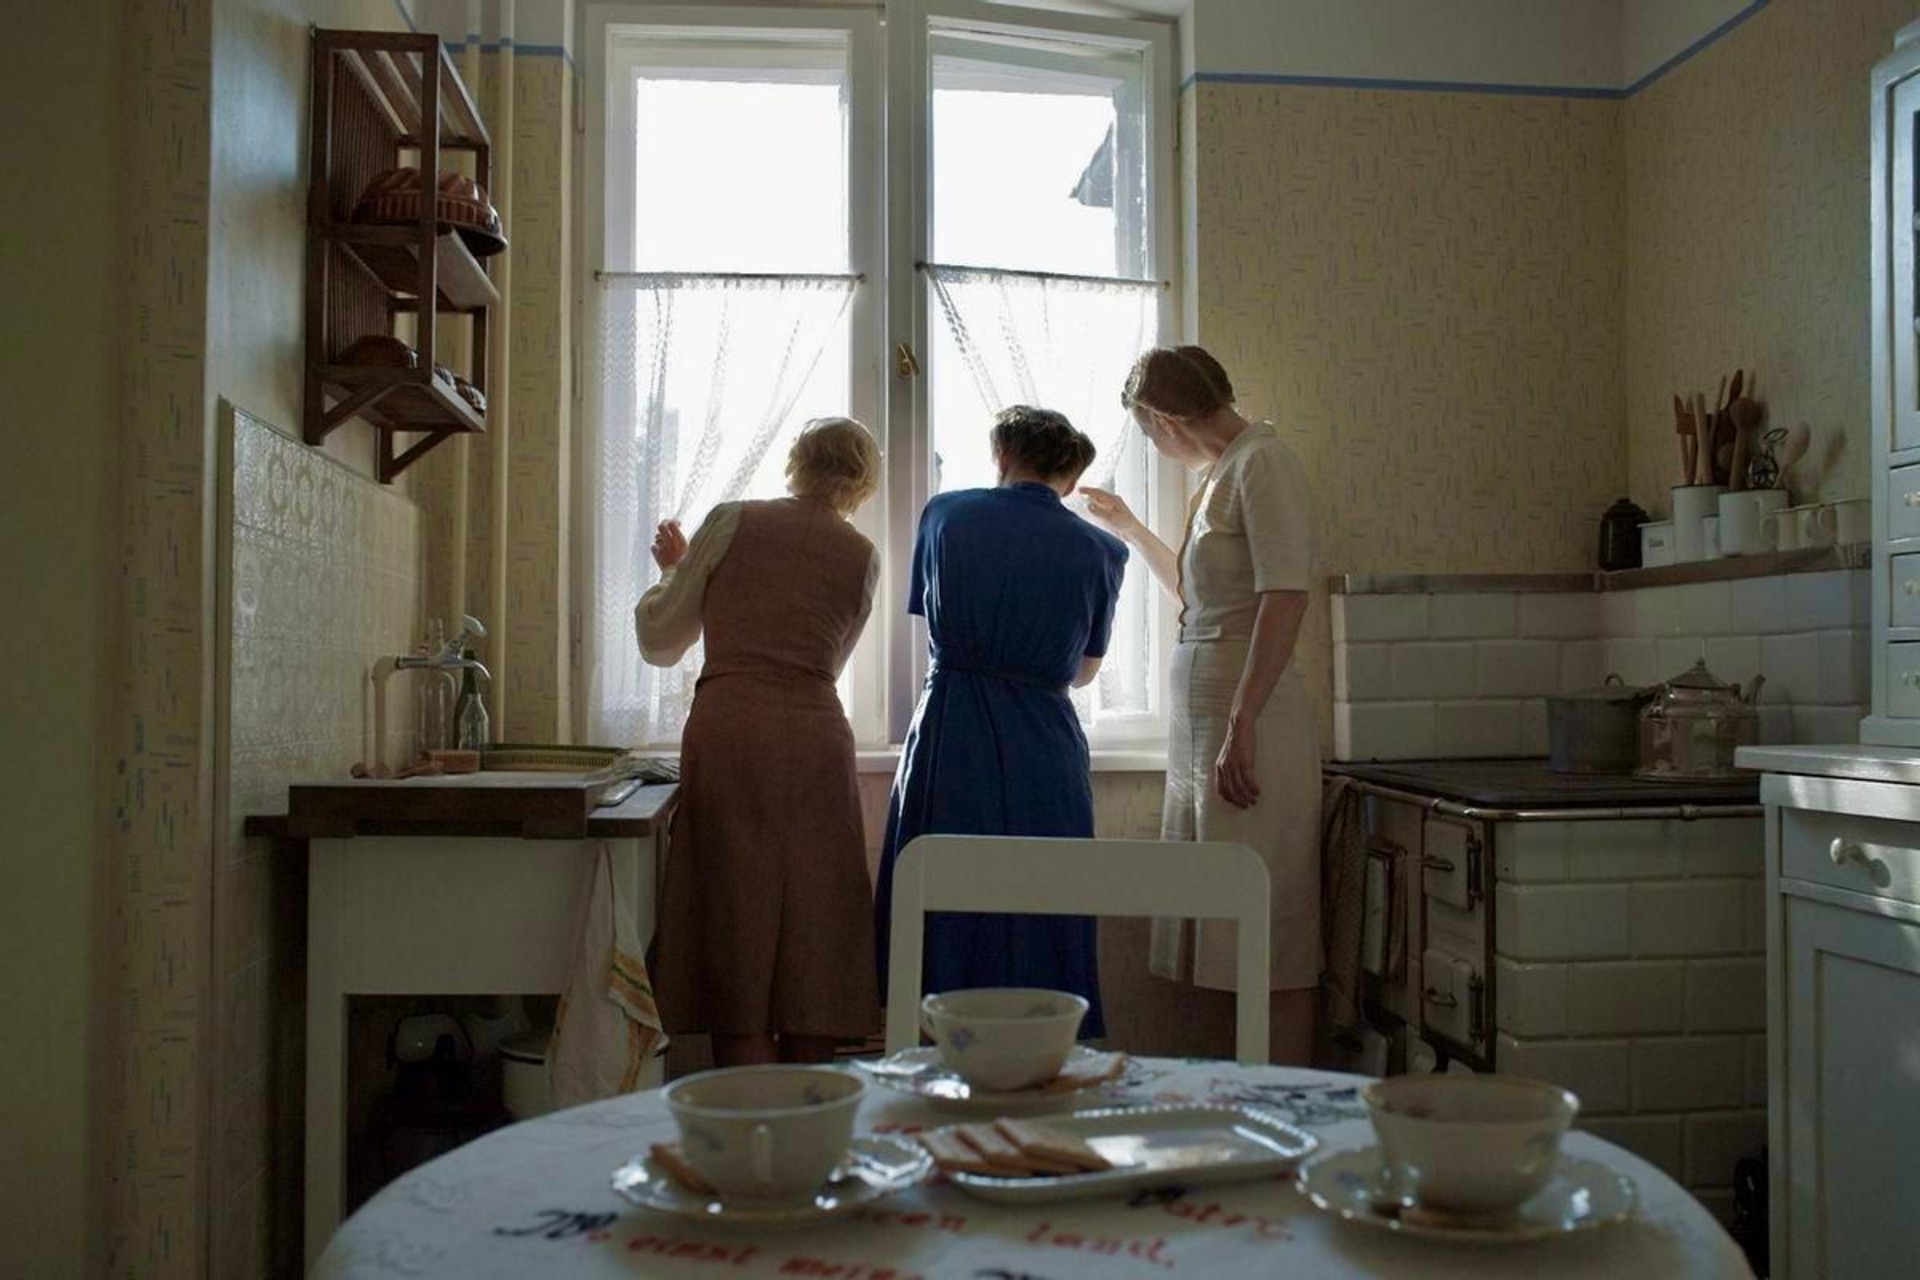 Three maids look out a window in this image from A24.